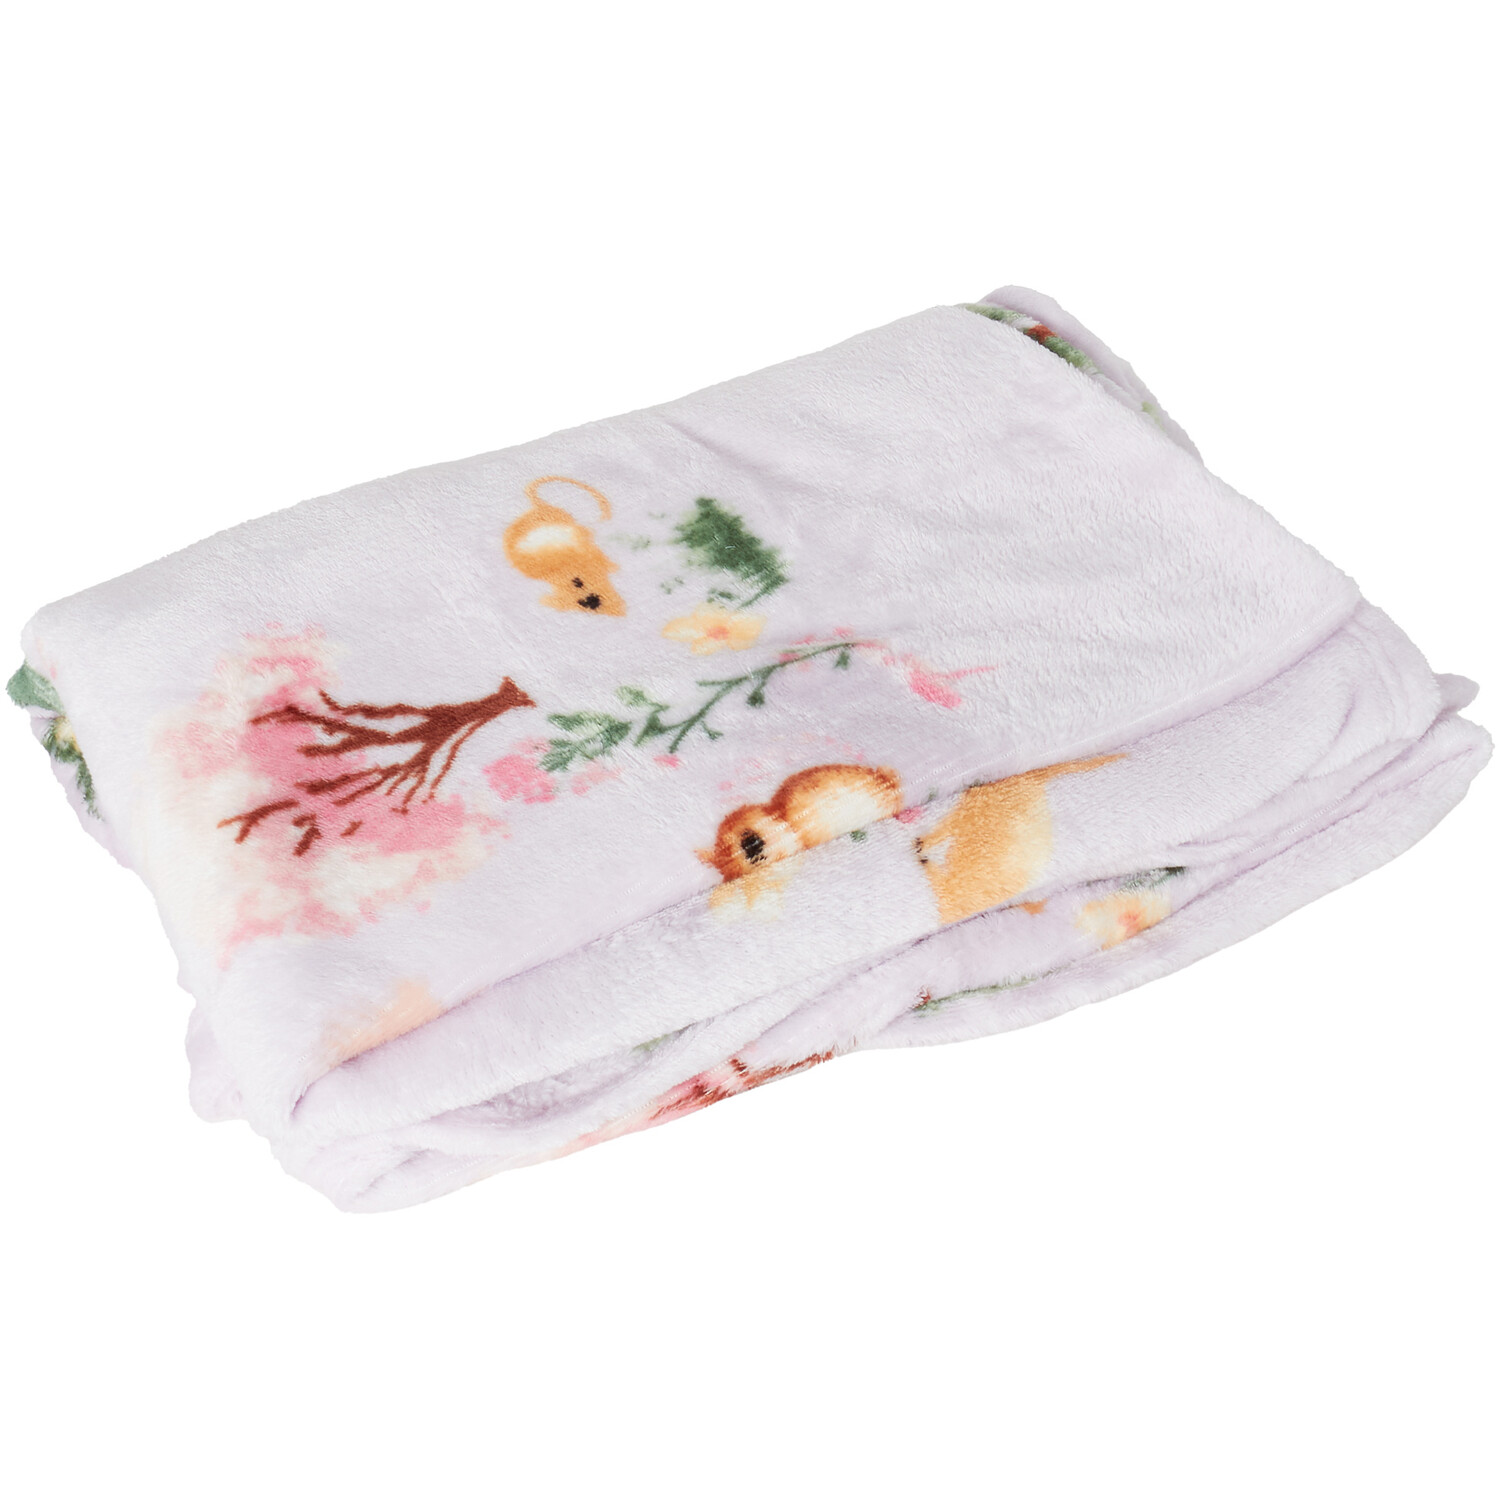 Enchanted Forest Throw - White Image 2